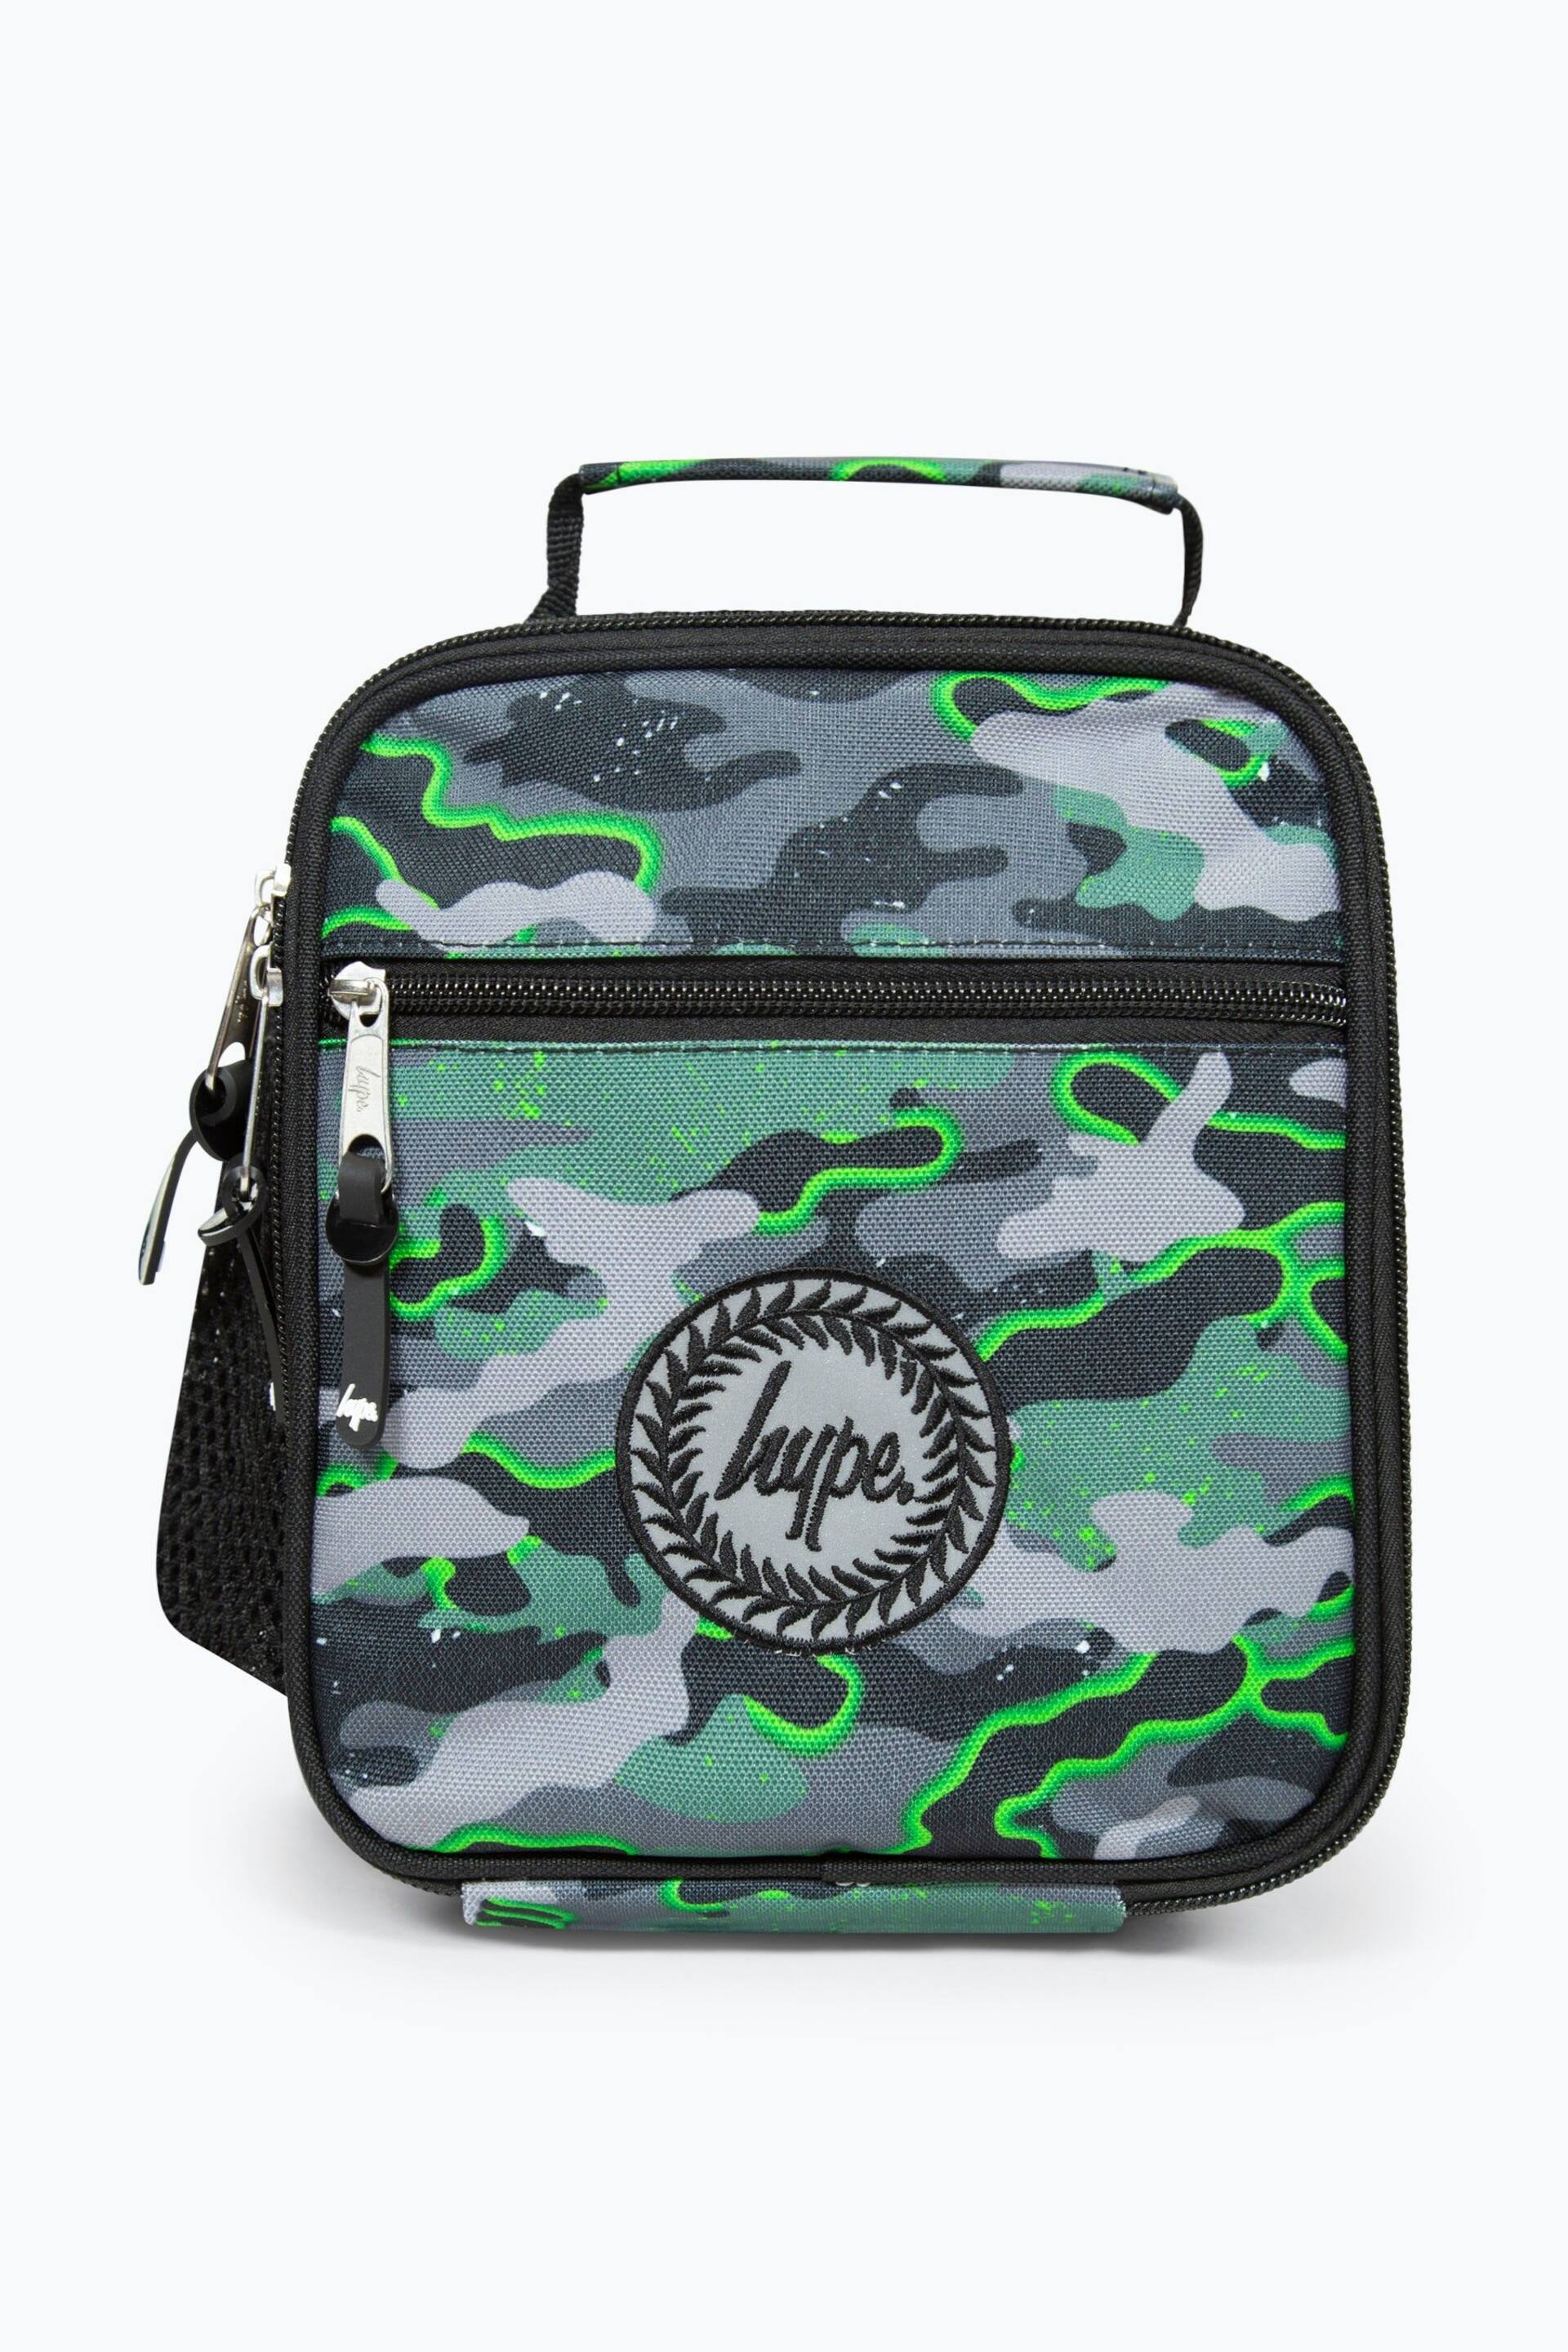 Hype. Glow Camo Lunch Box - Image 1 of 7